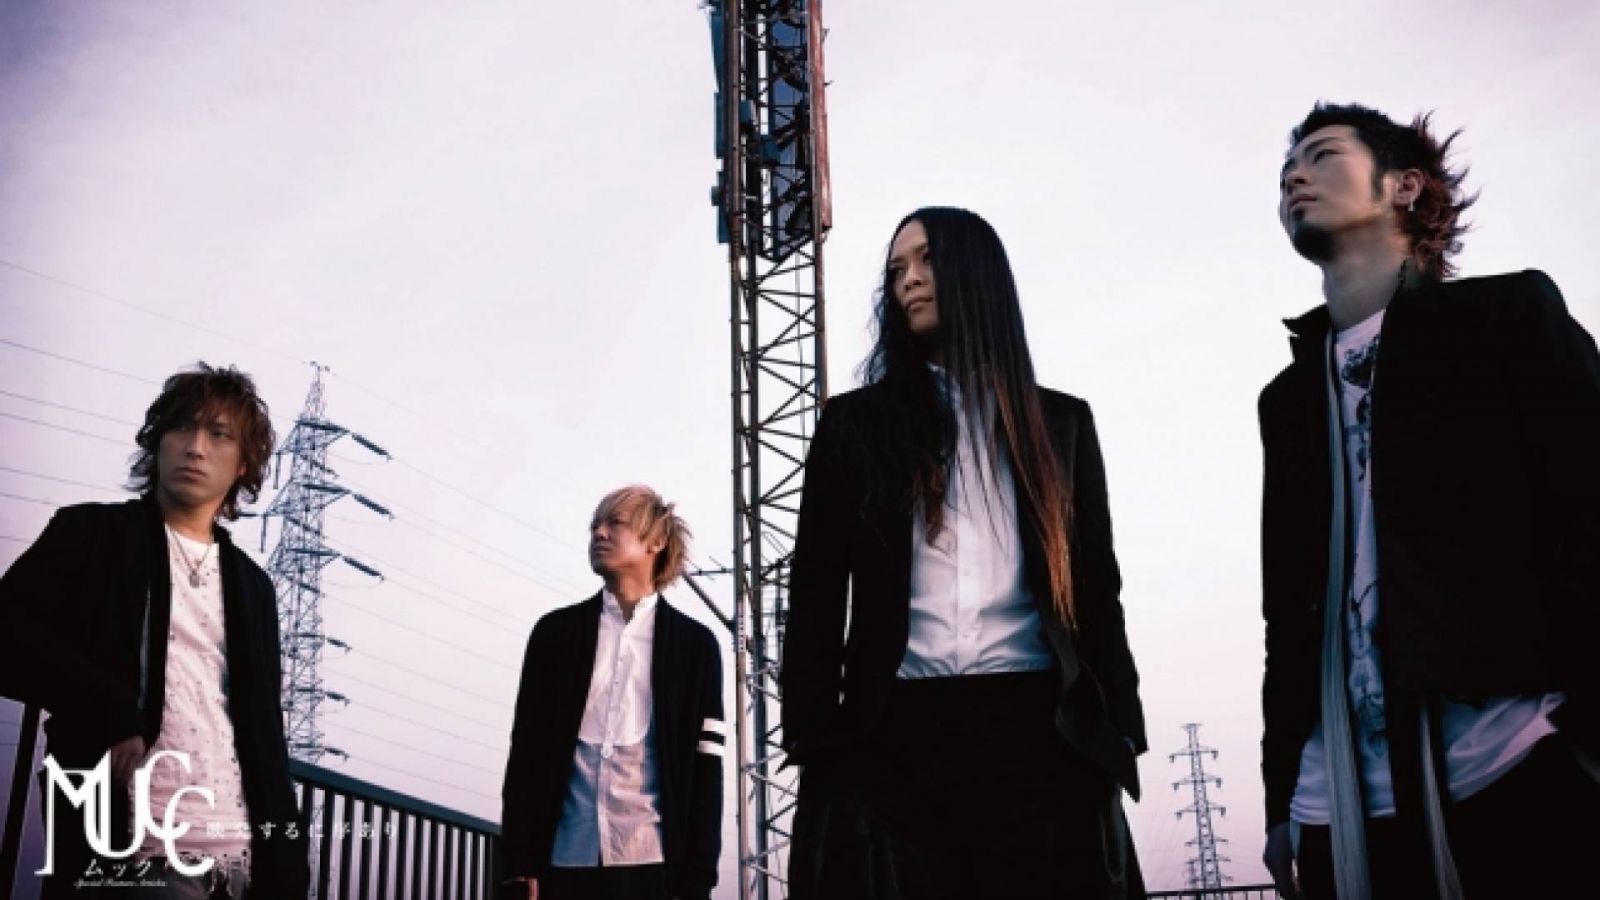 Details on MUCC's Upcoming Single © 2011 Zy.connection Inc. All Rights Reserved.